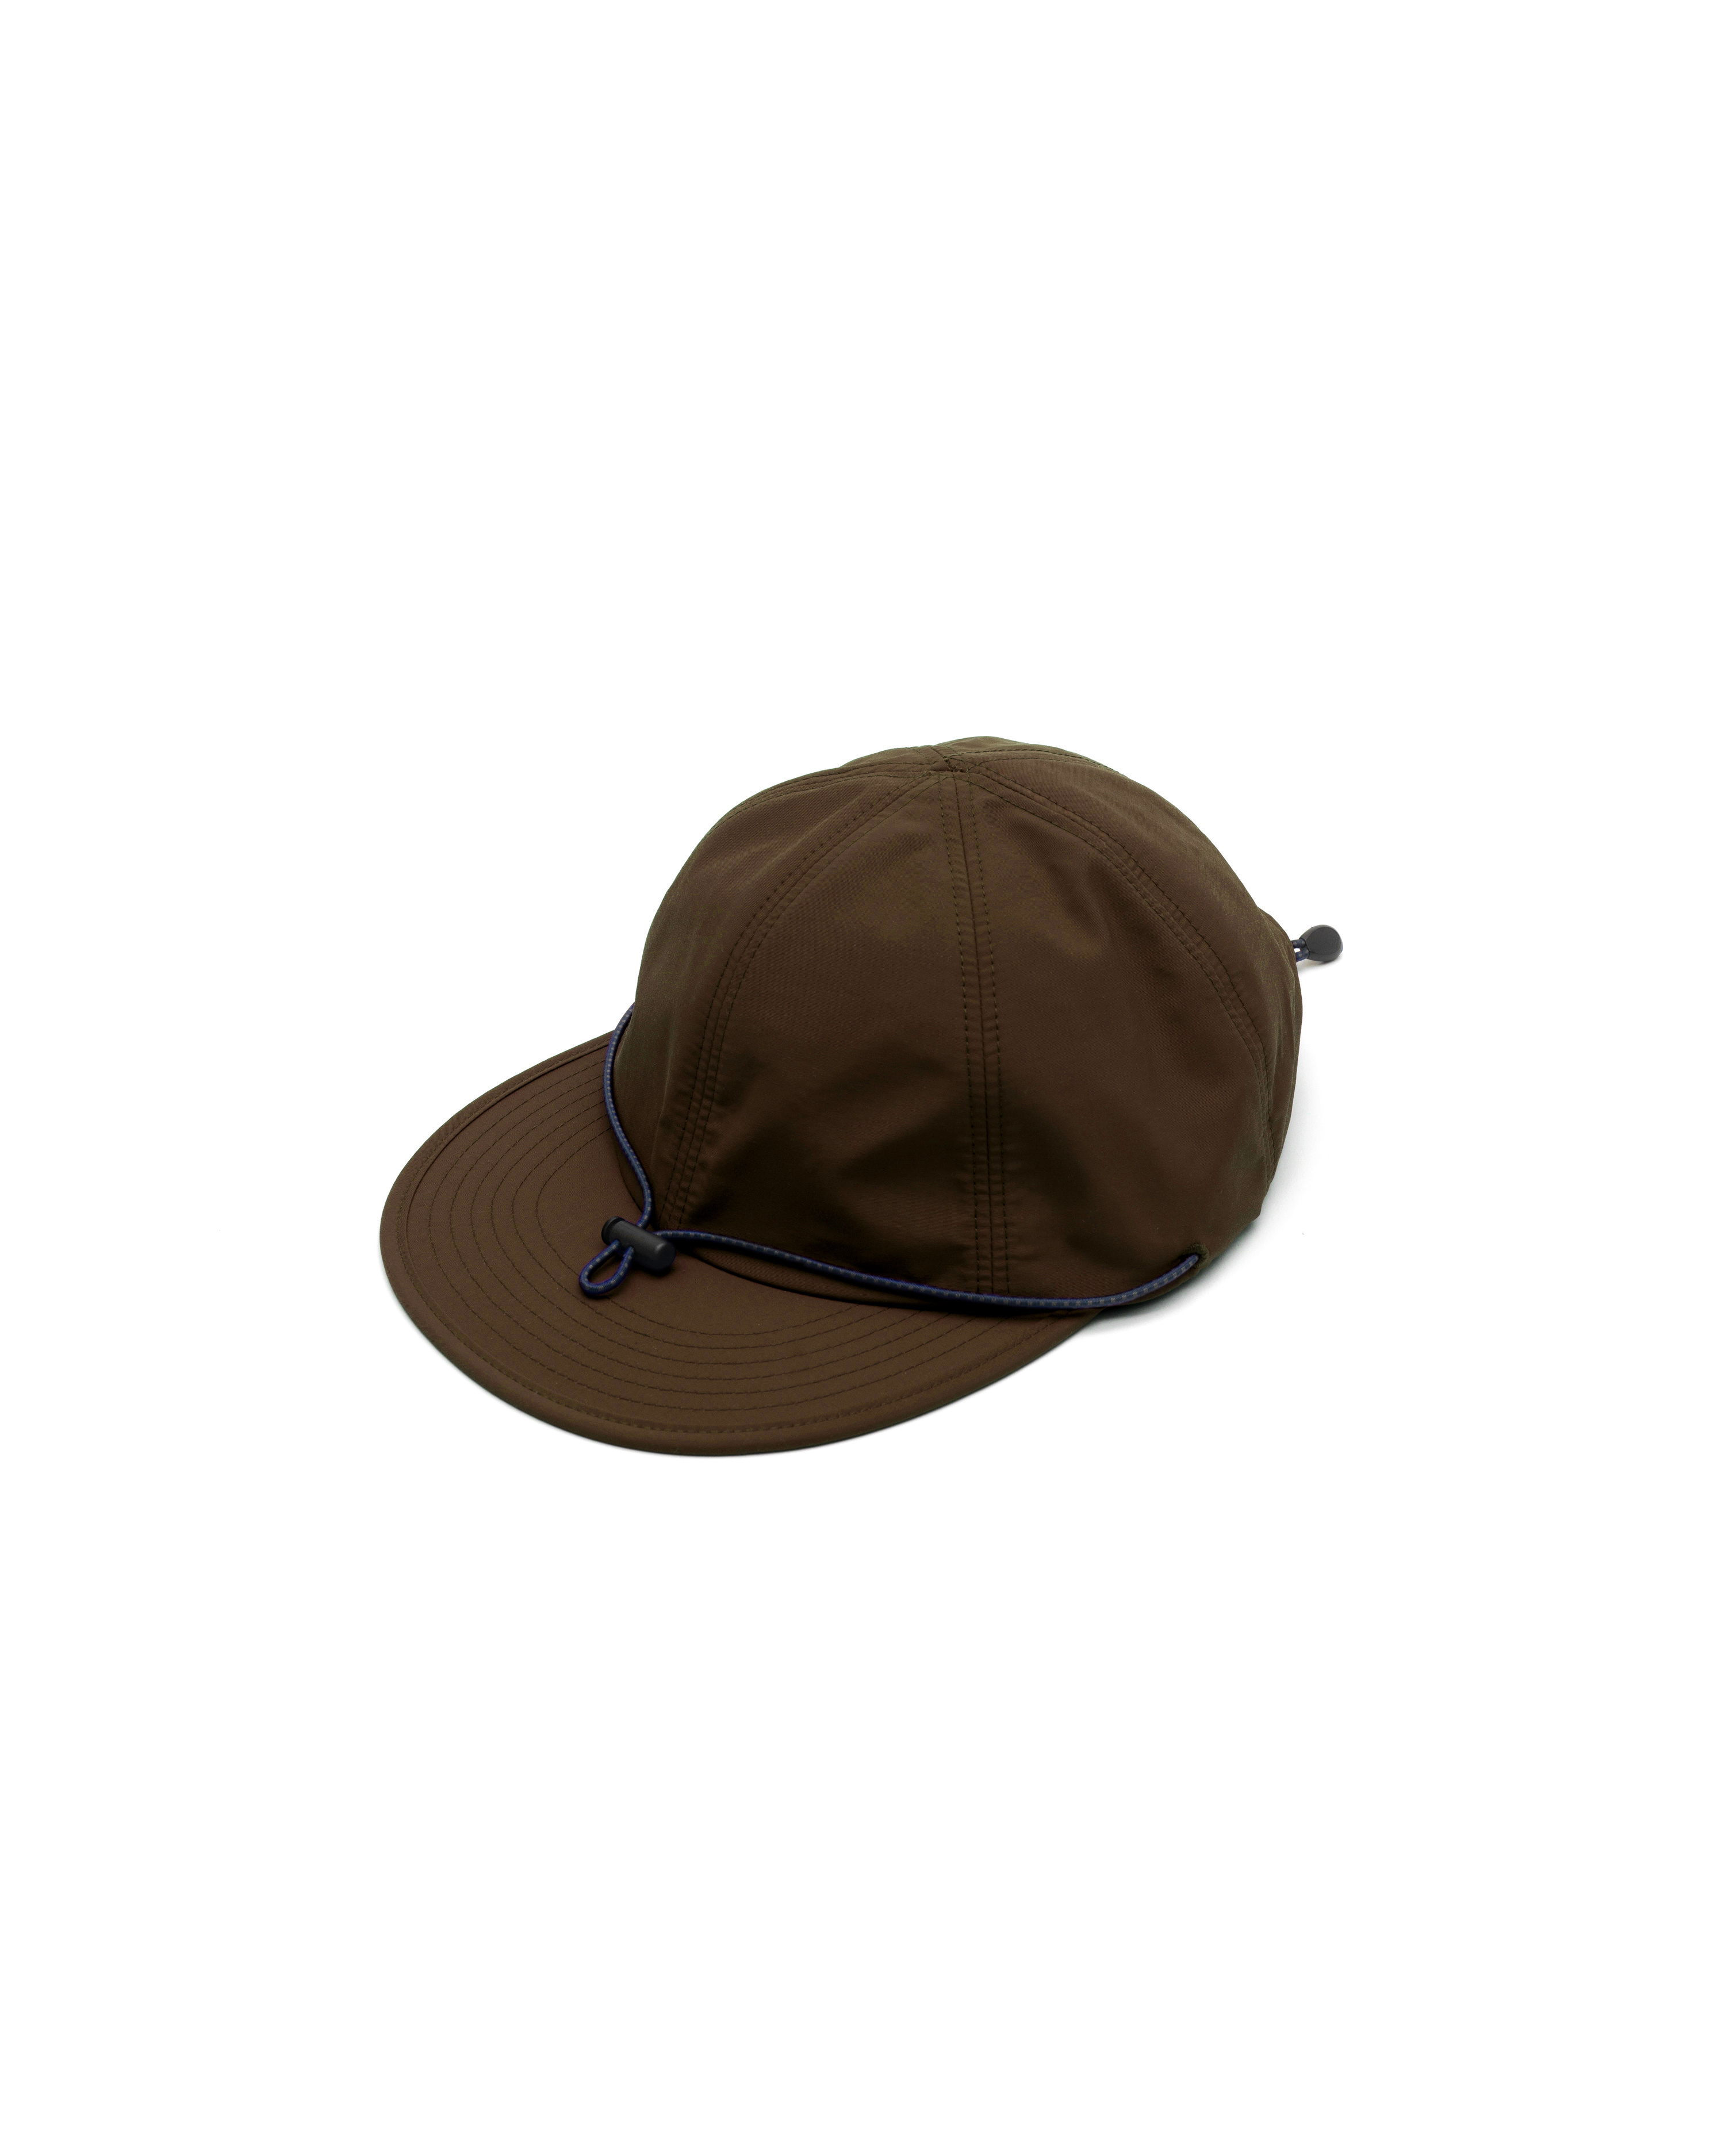 [out of stock] City 1 - Brown